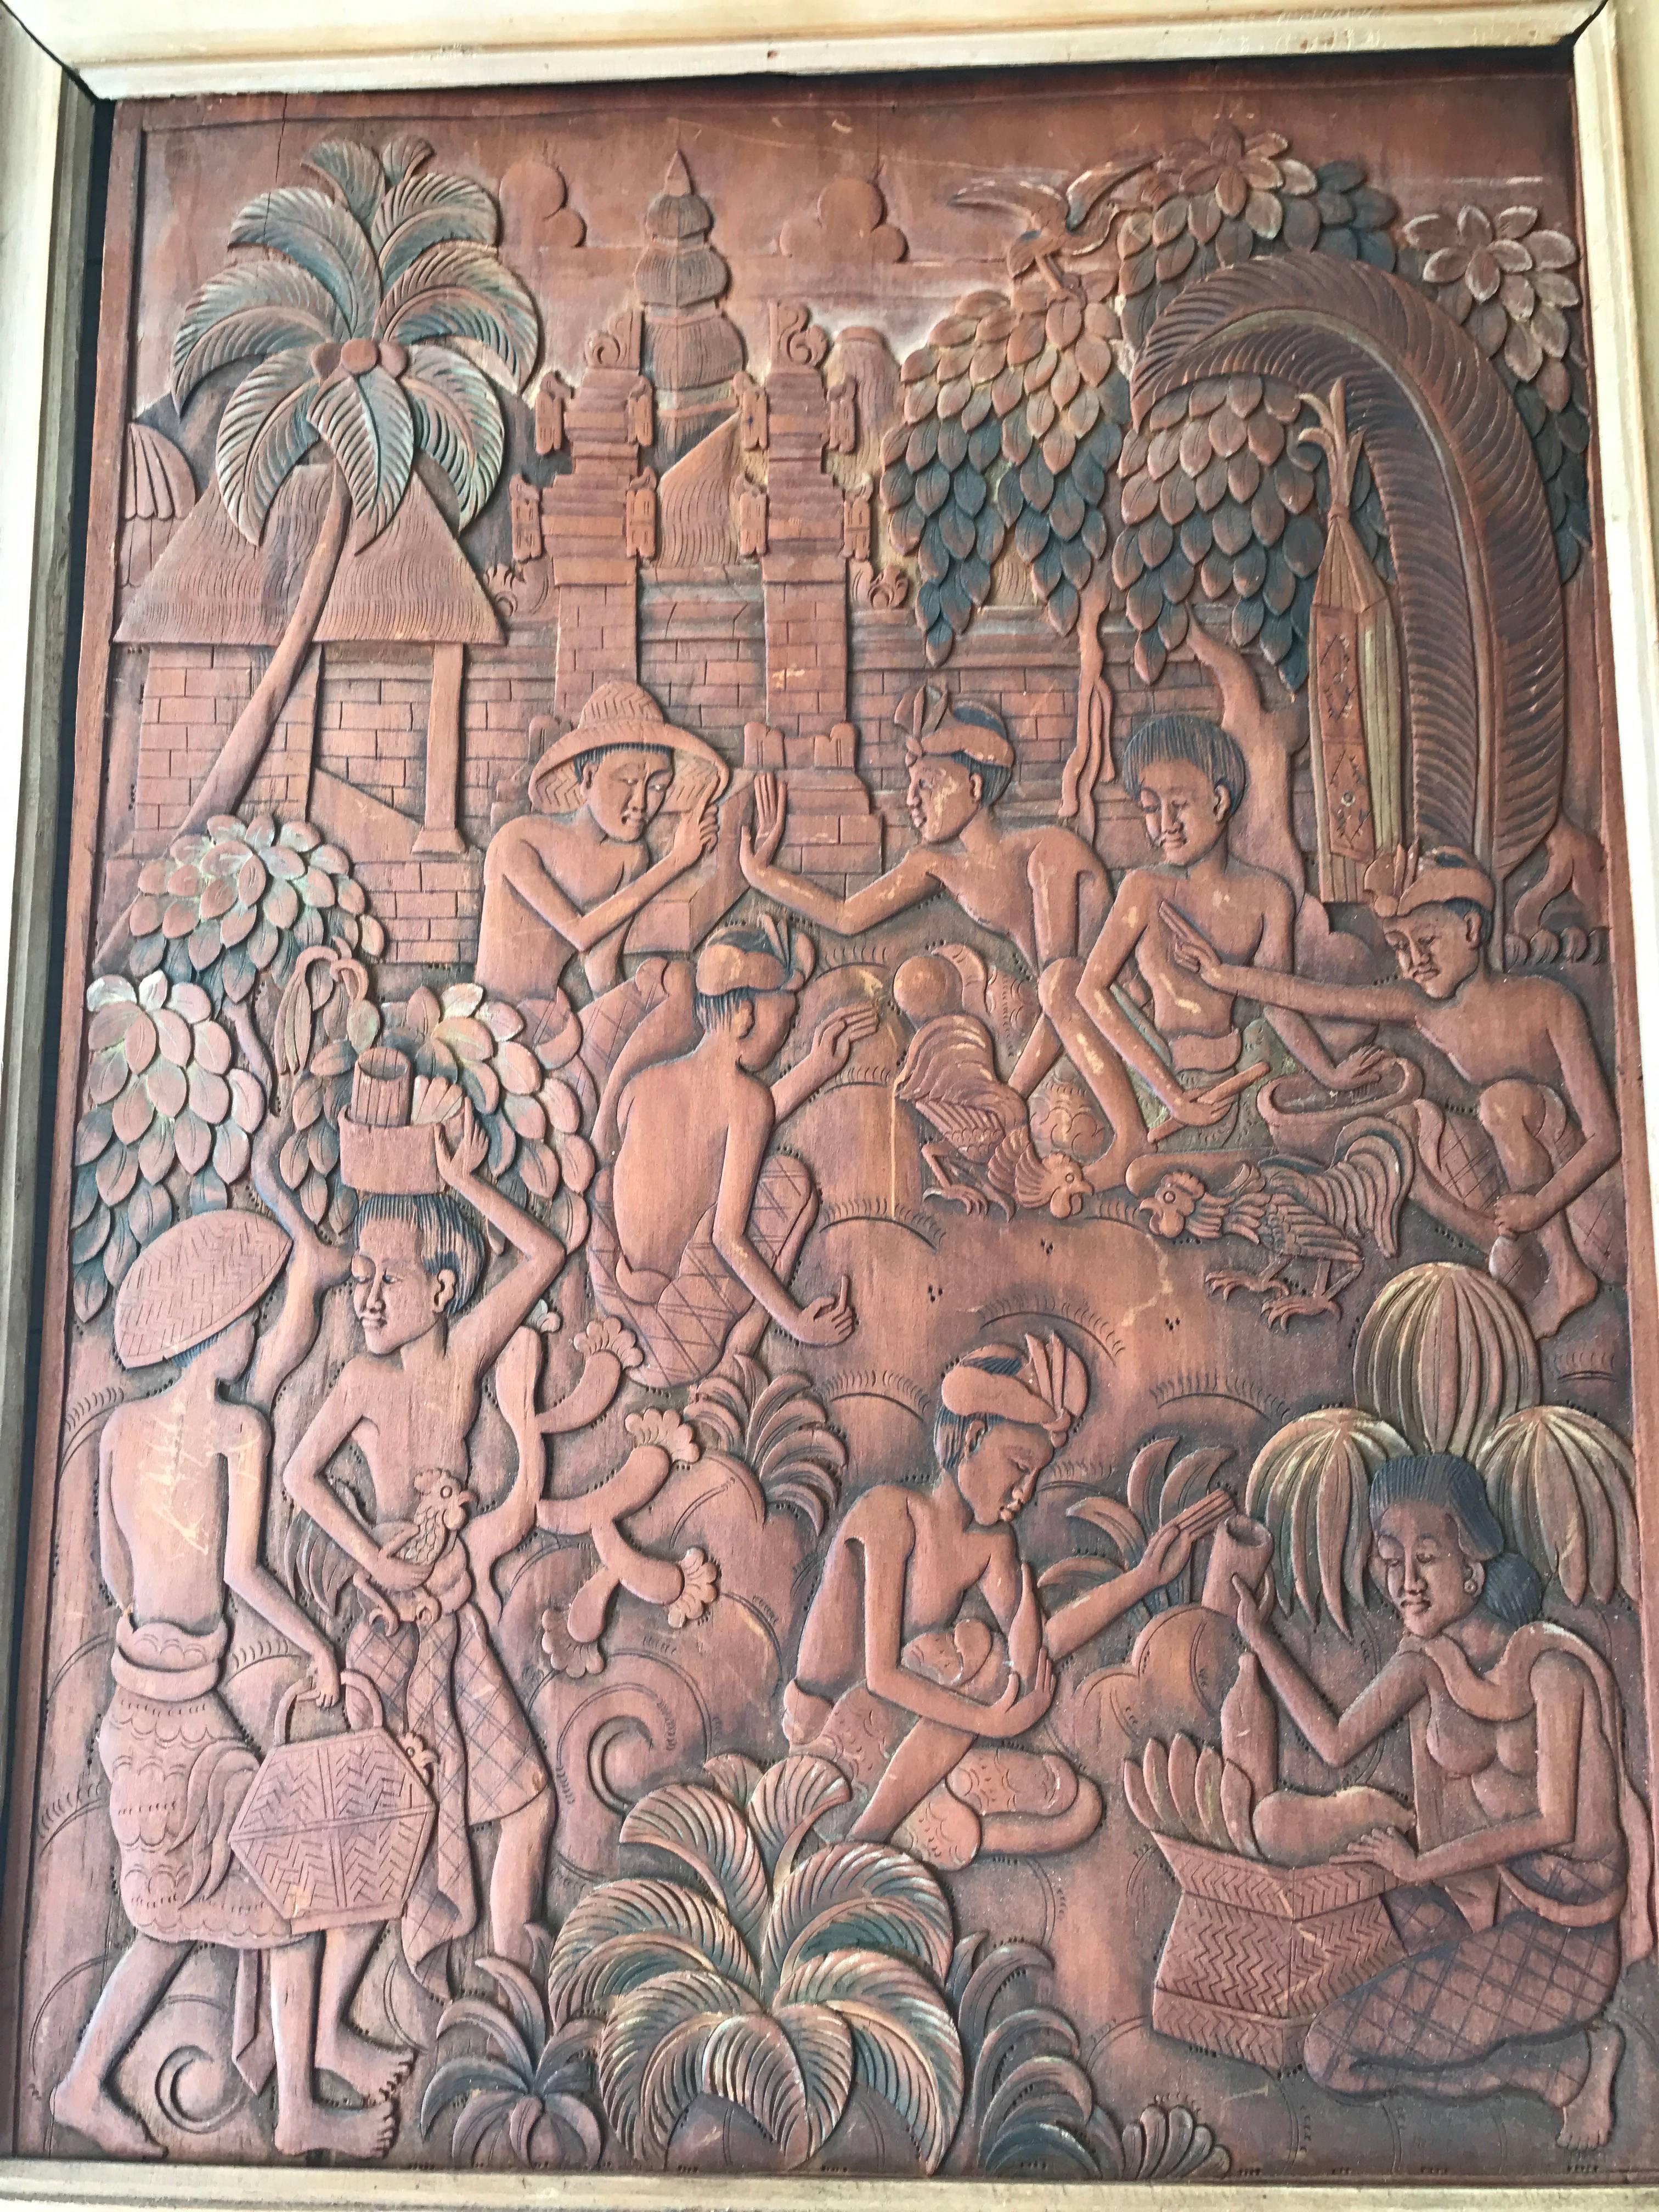 Museum quality carved wall panel in wooden frame.

Cockfights are a popular kind of local entertainment in Bali. They are often held as cleansing ceremonies to purify a village of evil magic influences. A cockfight is also seen as a sport, sometimes